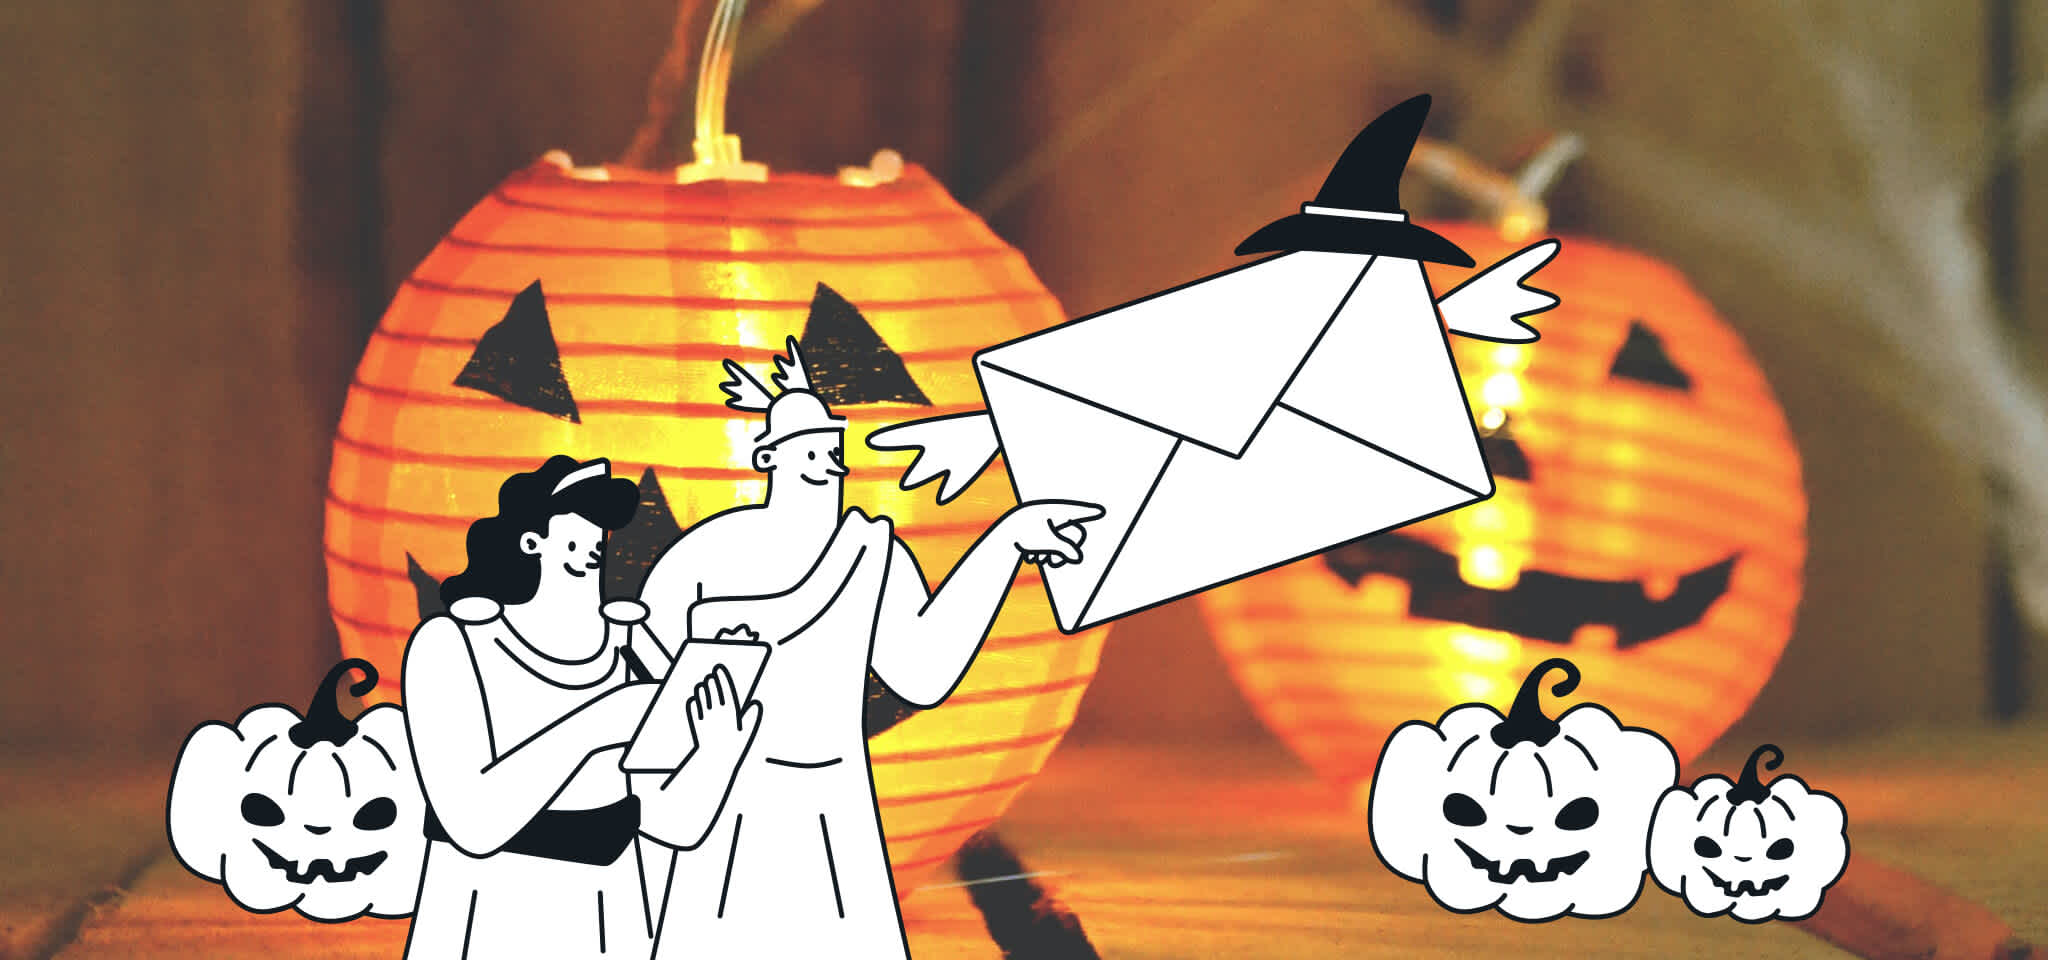 Hermes and a Goddess point to a spooky envelope in front of scary pumpkins